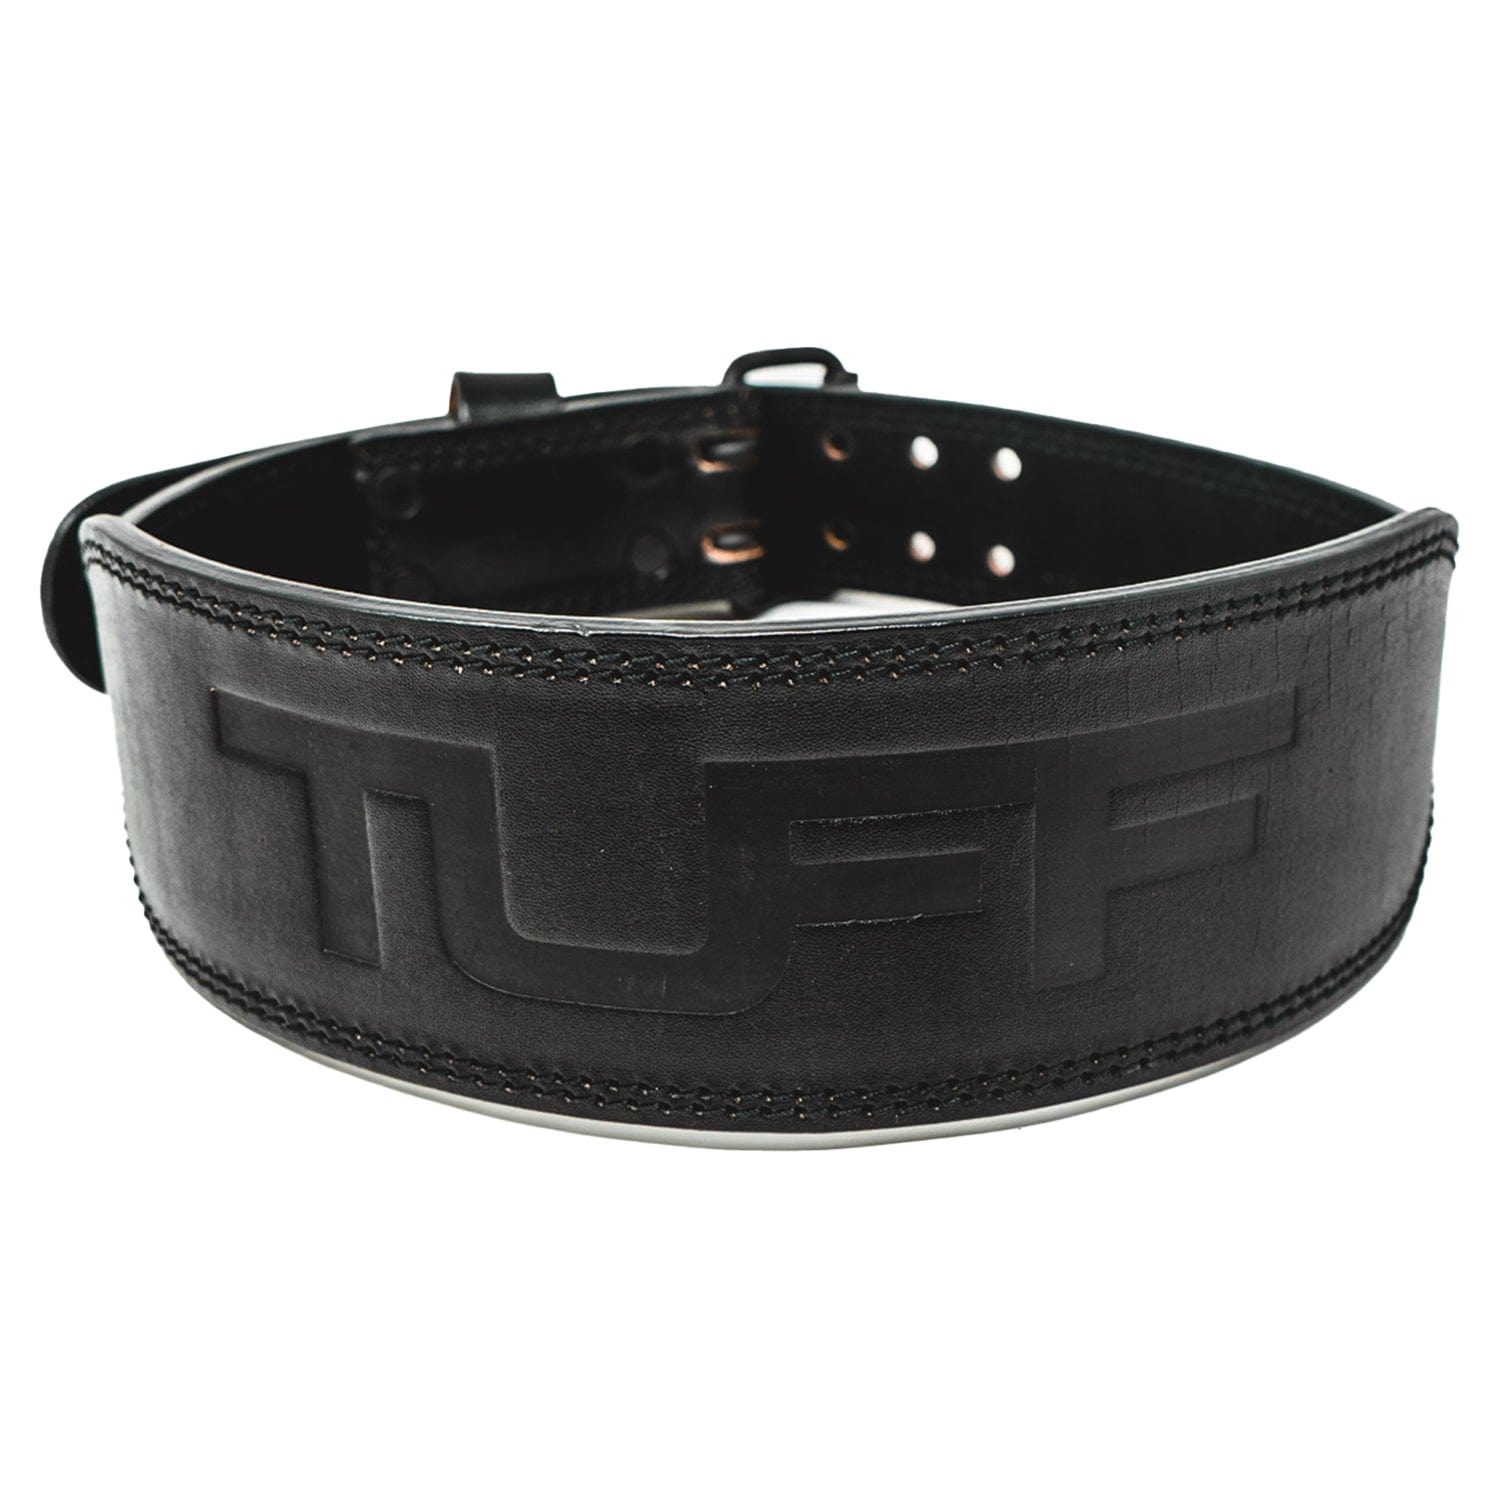 Shop Premium Leather Weightlifting Belts for Squats & Deadlifts